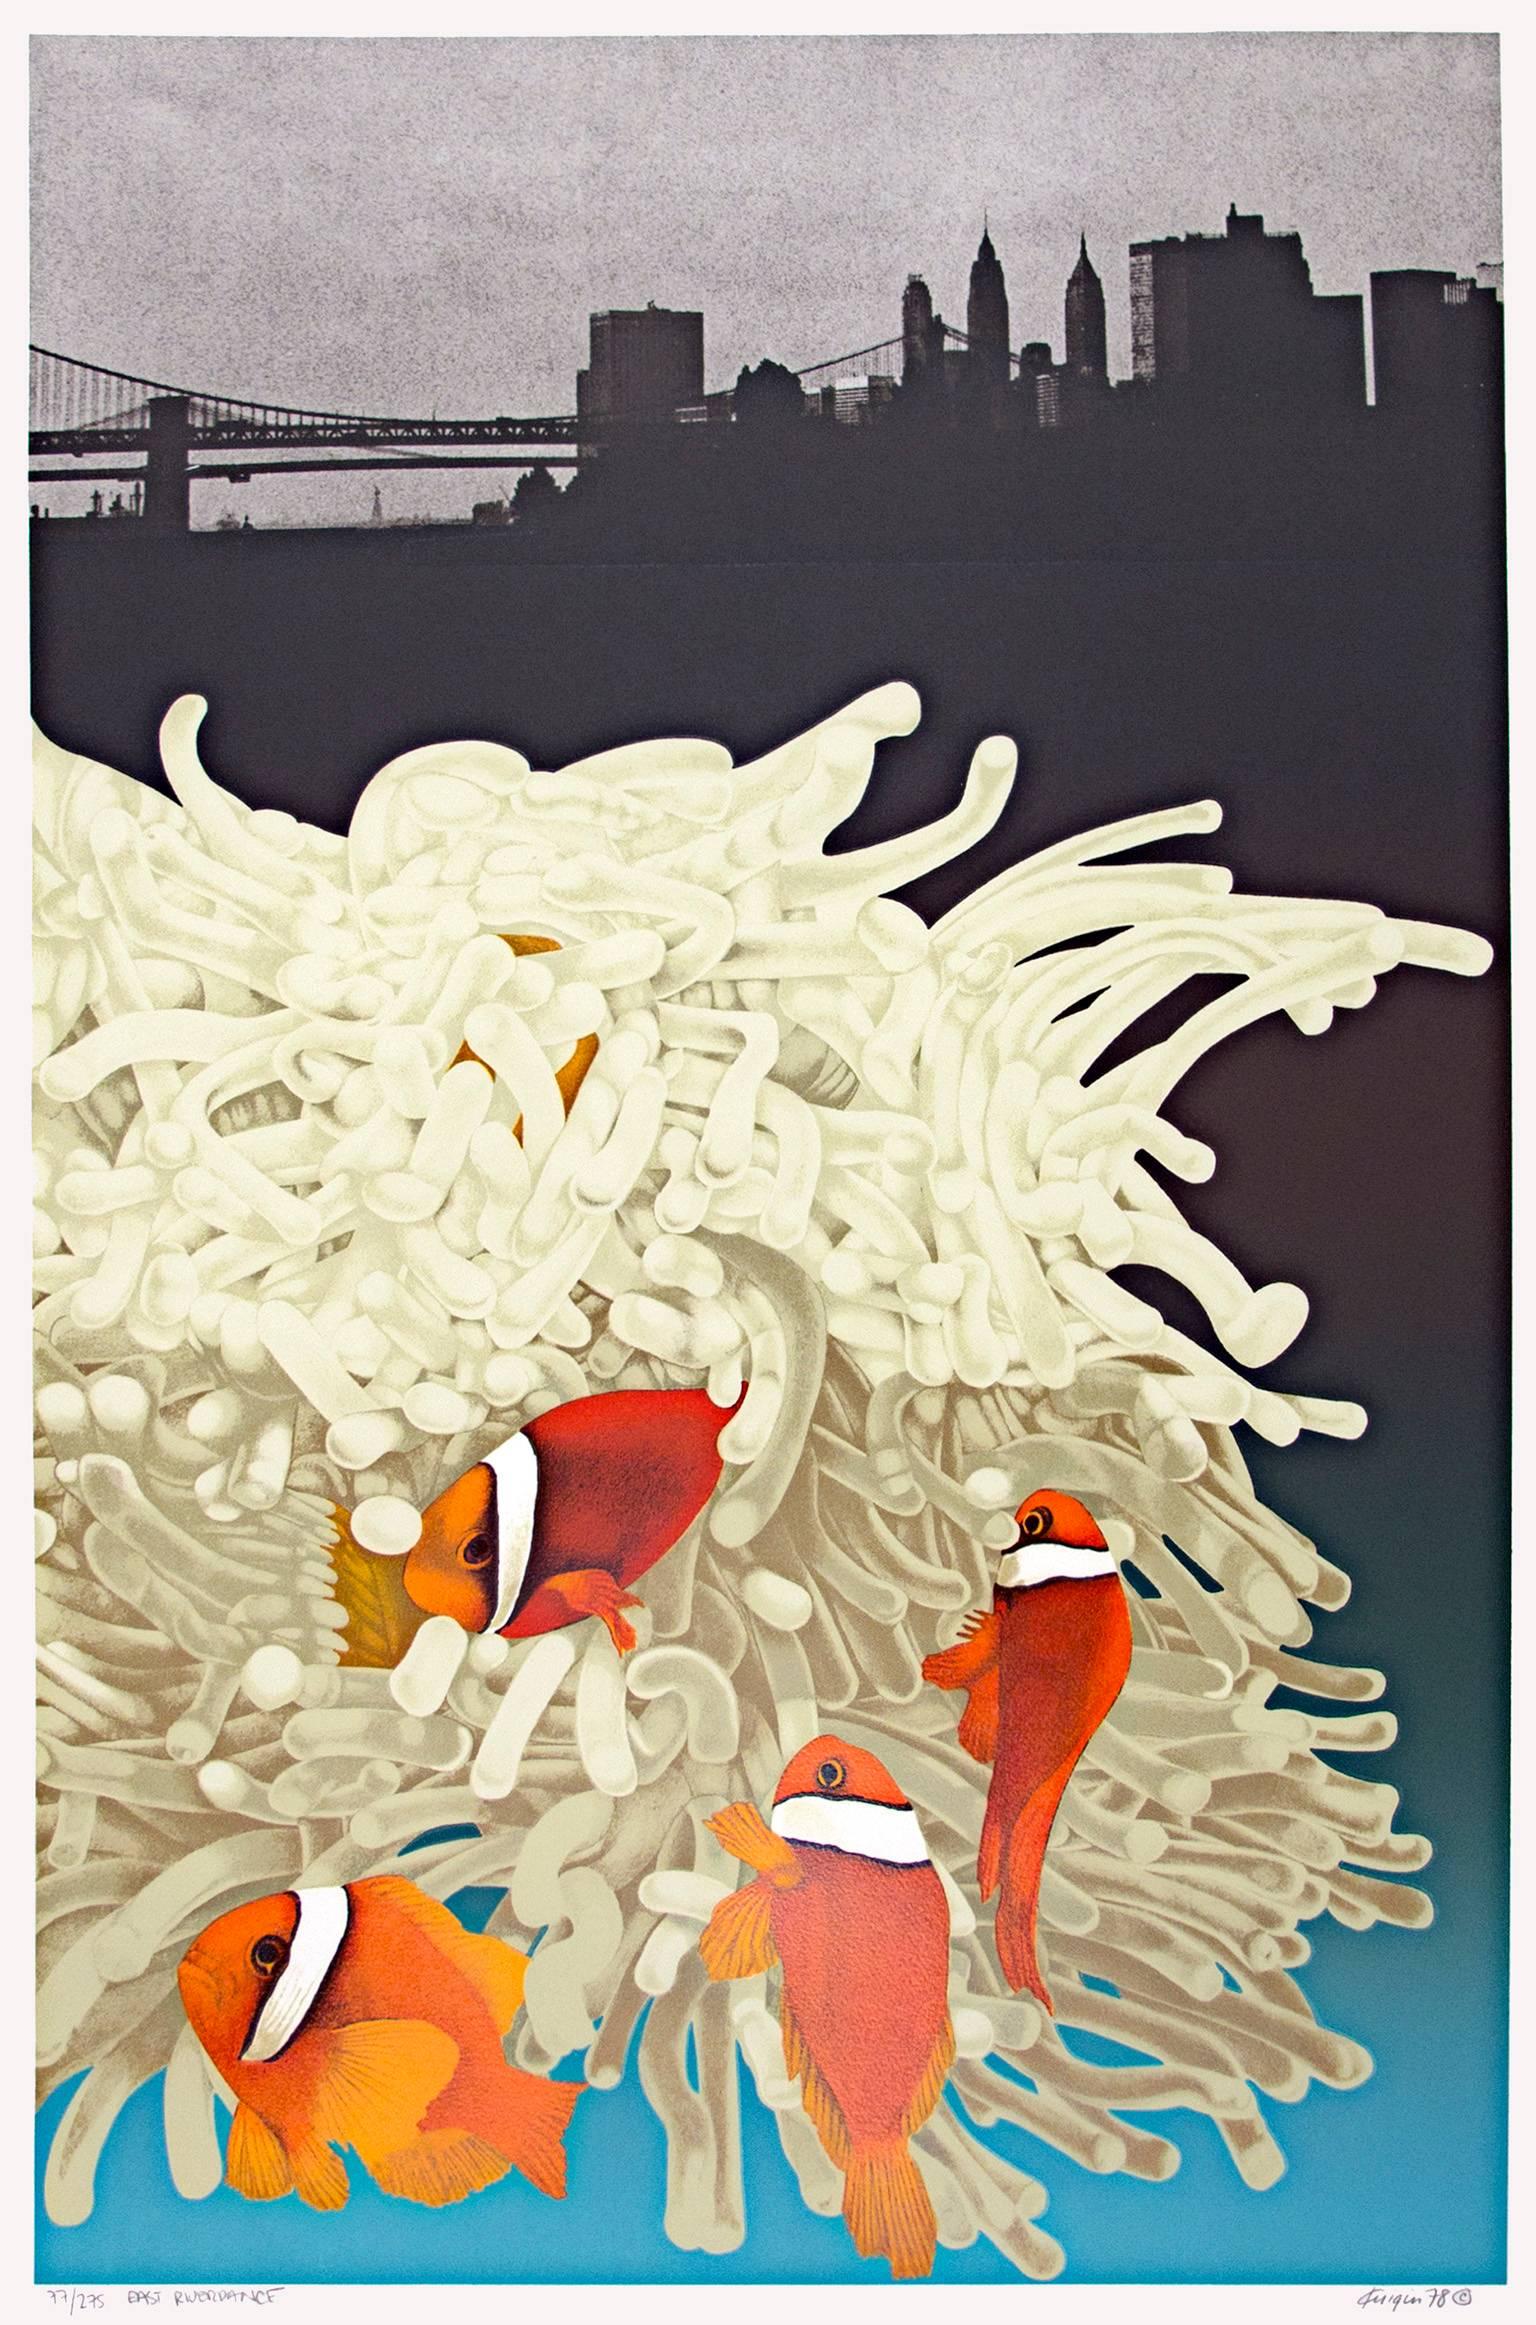 "East River Dance" is an original color lithograph by Michael Knigin. The artist signed the piece in the lower right and wrote the edition number, 77/275, in the lower left corner. This piece depicts four clownfish in an anemone and New York City in